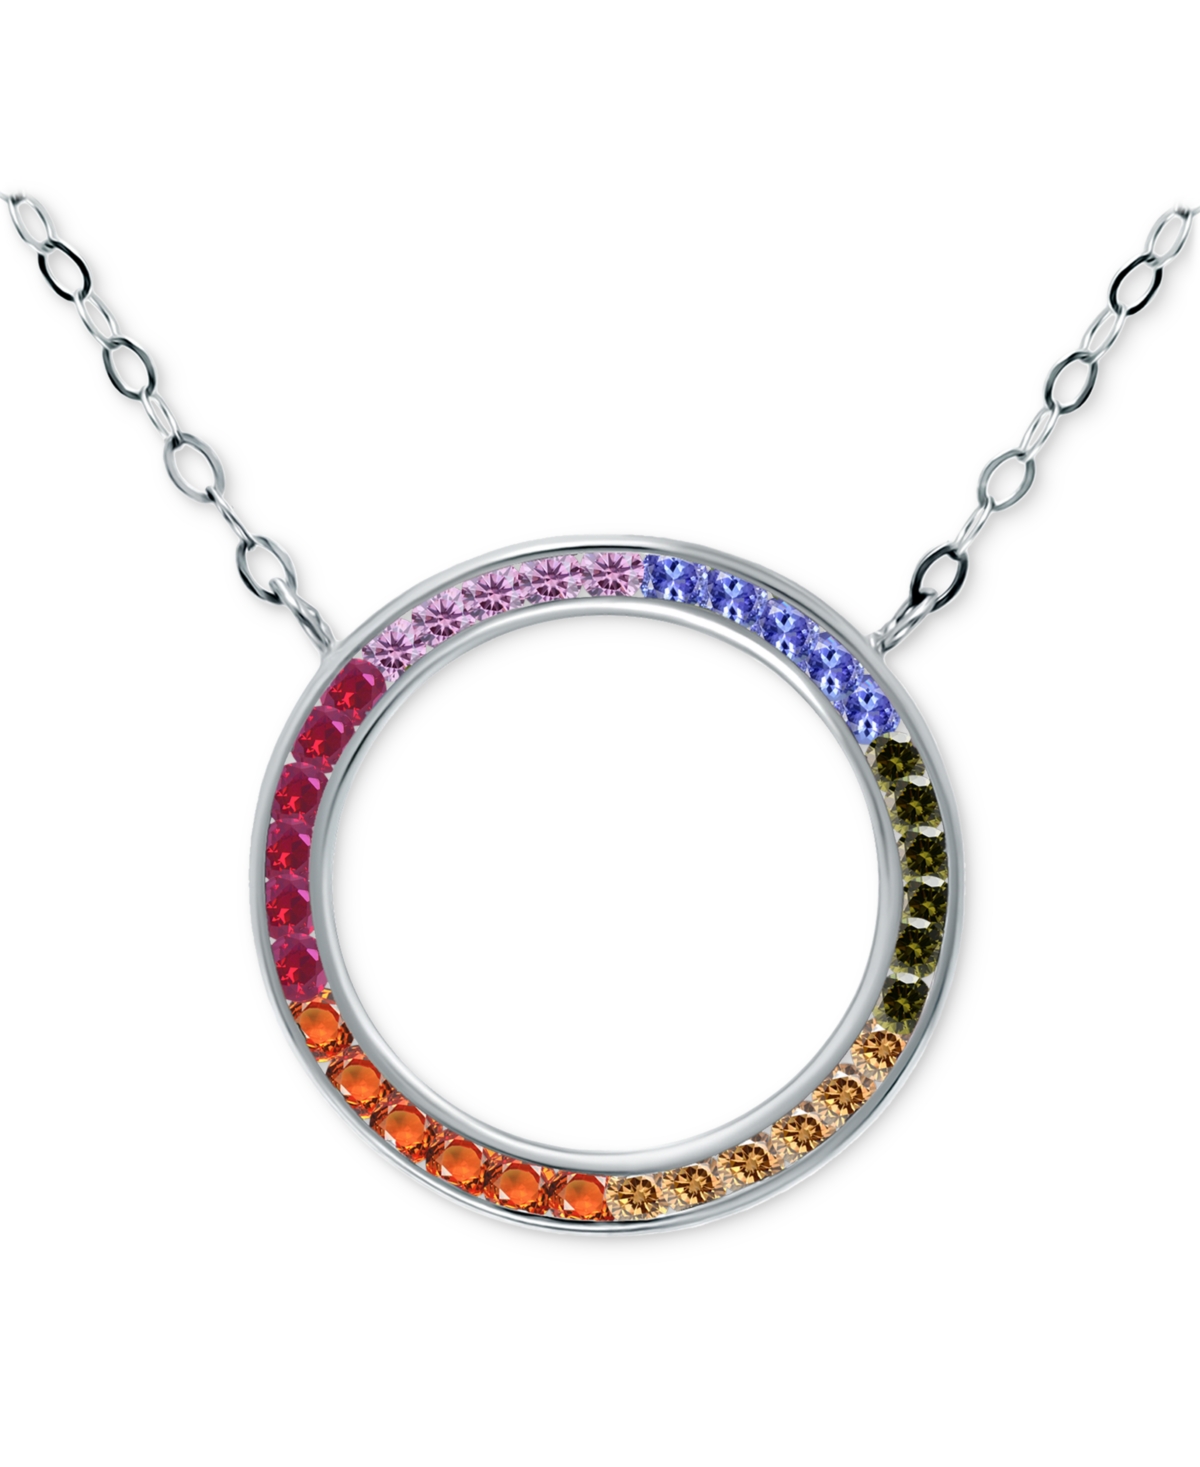 Giani Bernini Rainbow Cubic Zirconia Circle Pendant Necklace In Sterling Silver, 16" + 2" Extender, Created For Ma